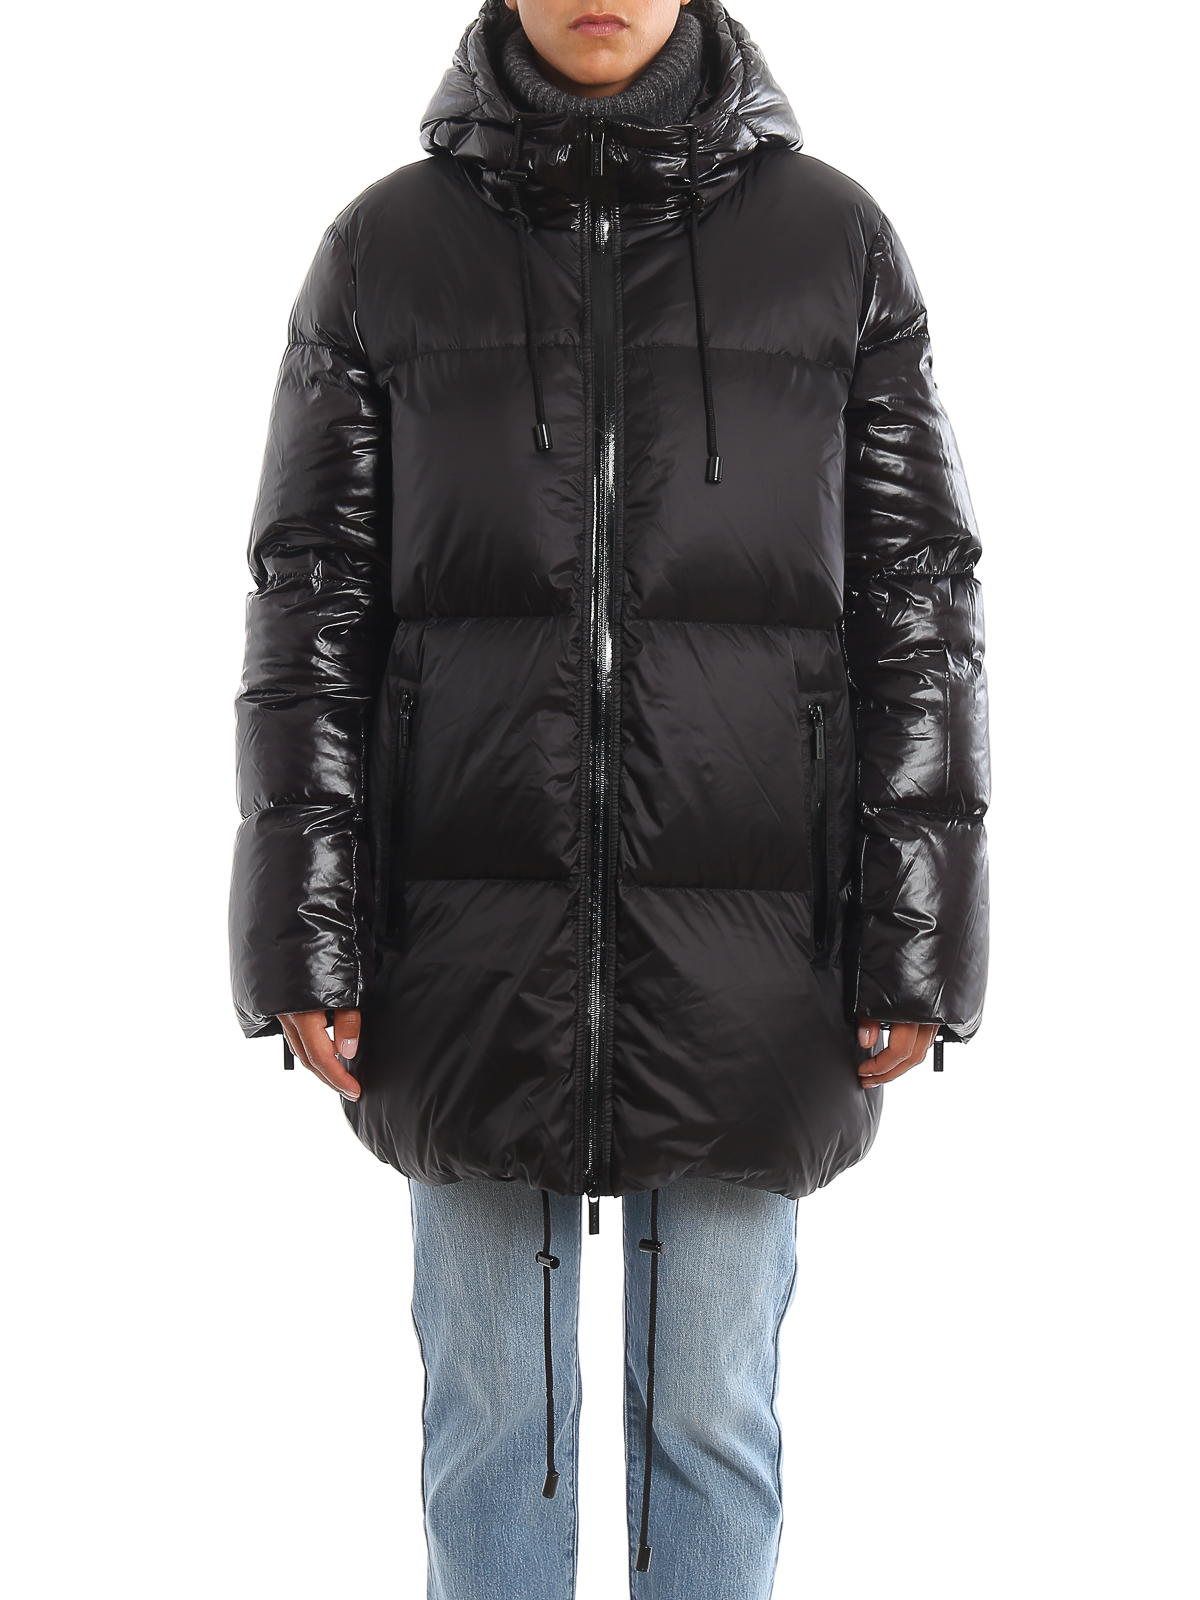 Michael Kors Quilted Nylon Packable Puffer Jacket in Brown  Lyst